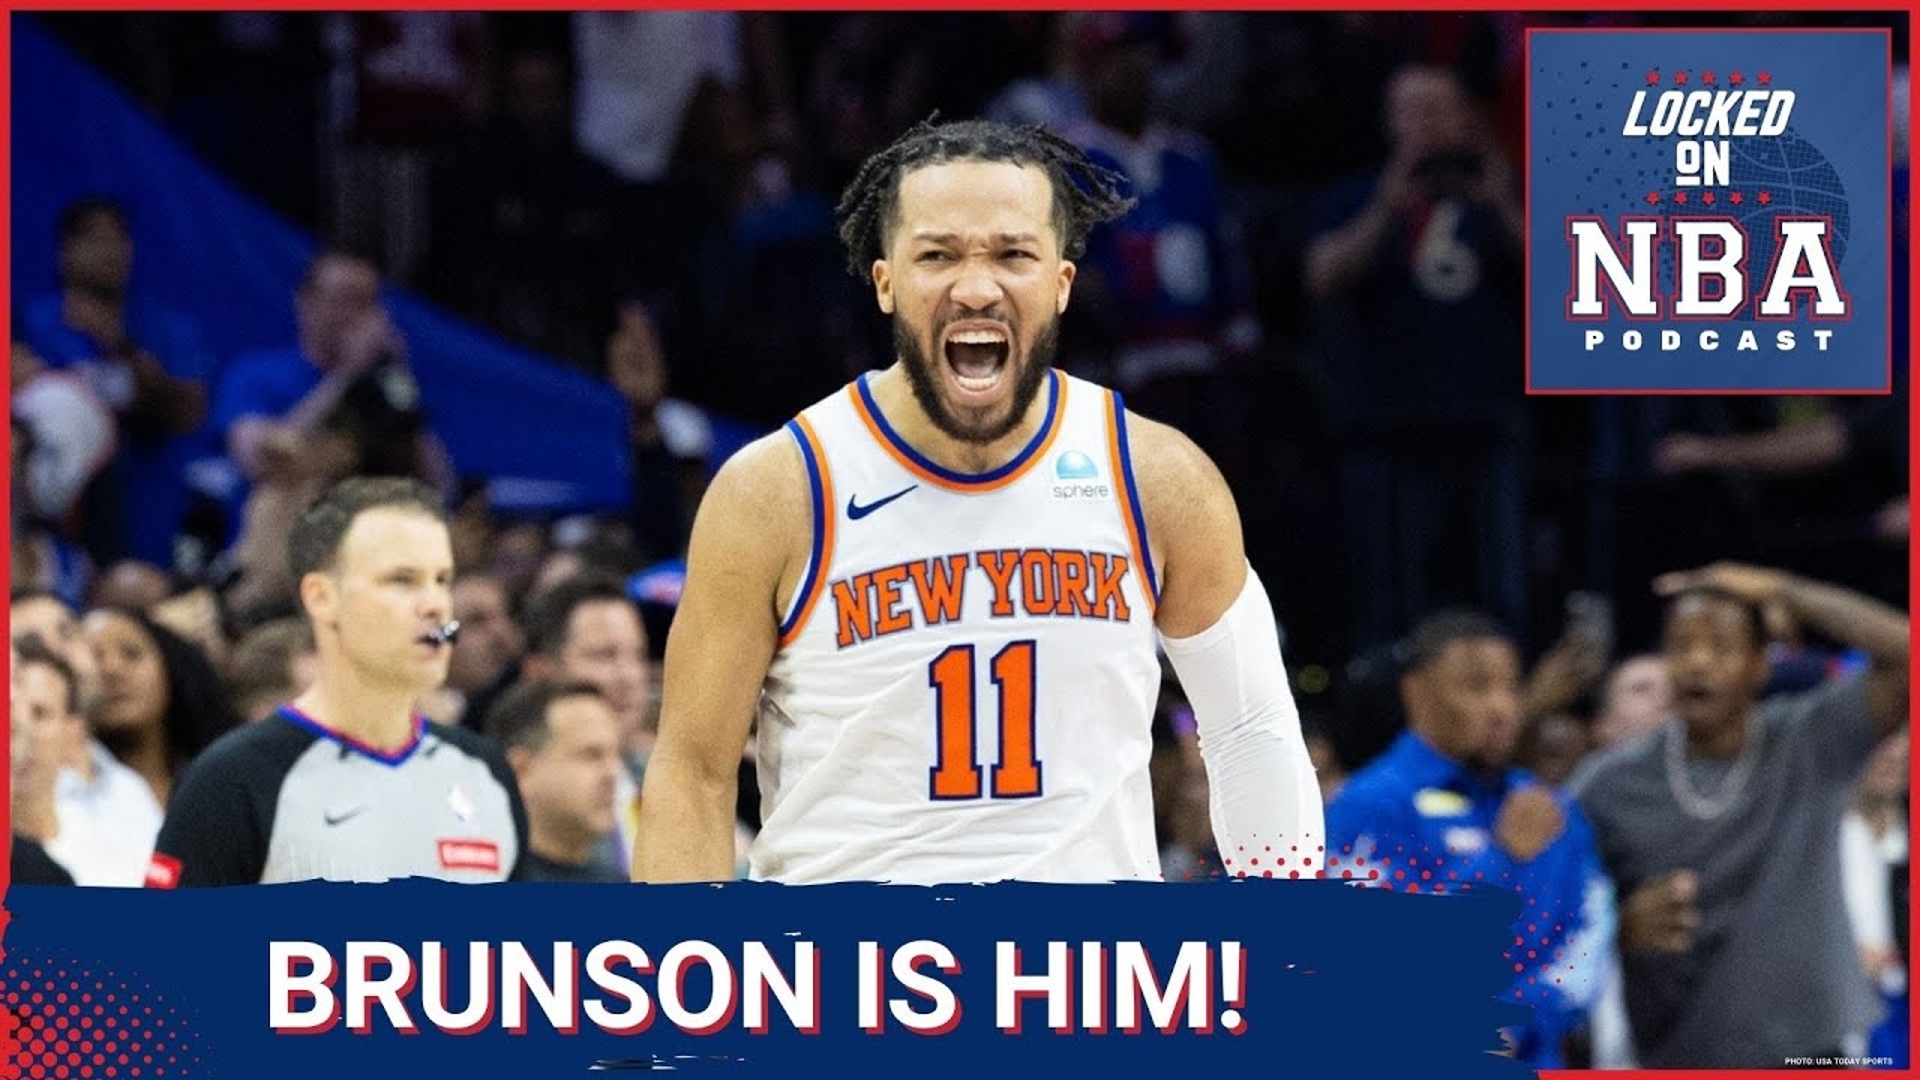 KNICKSTAPE! New York advances to the second round over the Indiana Pacers as Jalen Brunson and Josh Hart lead the heroics in Philly.